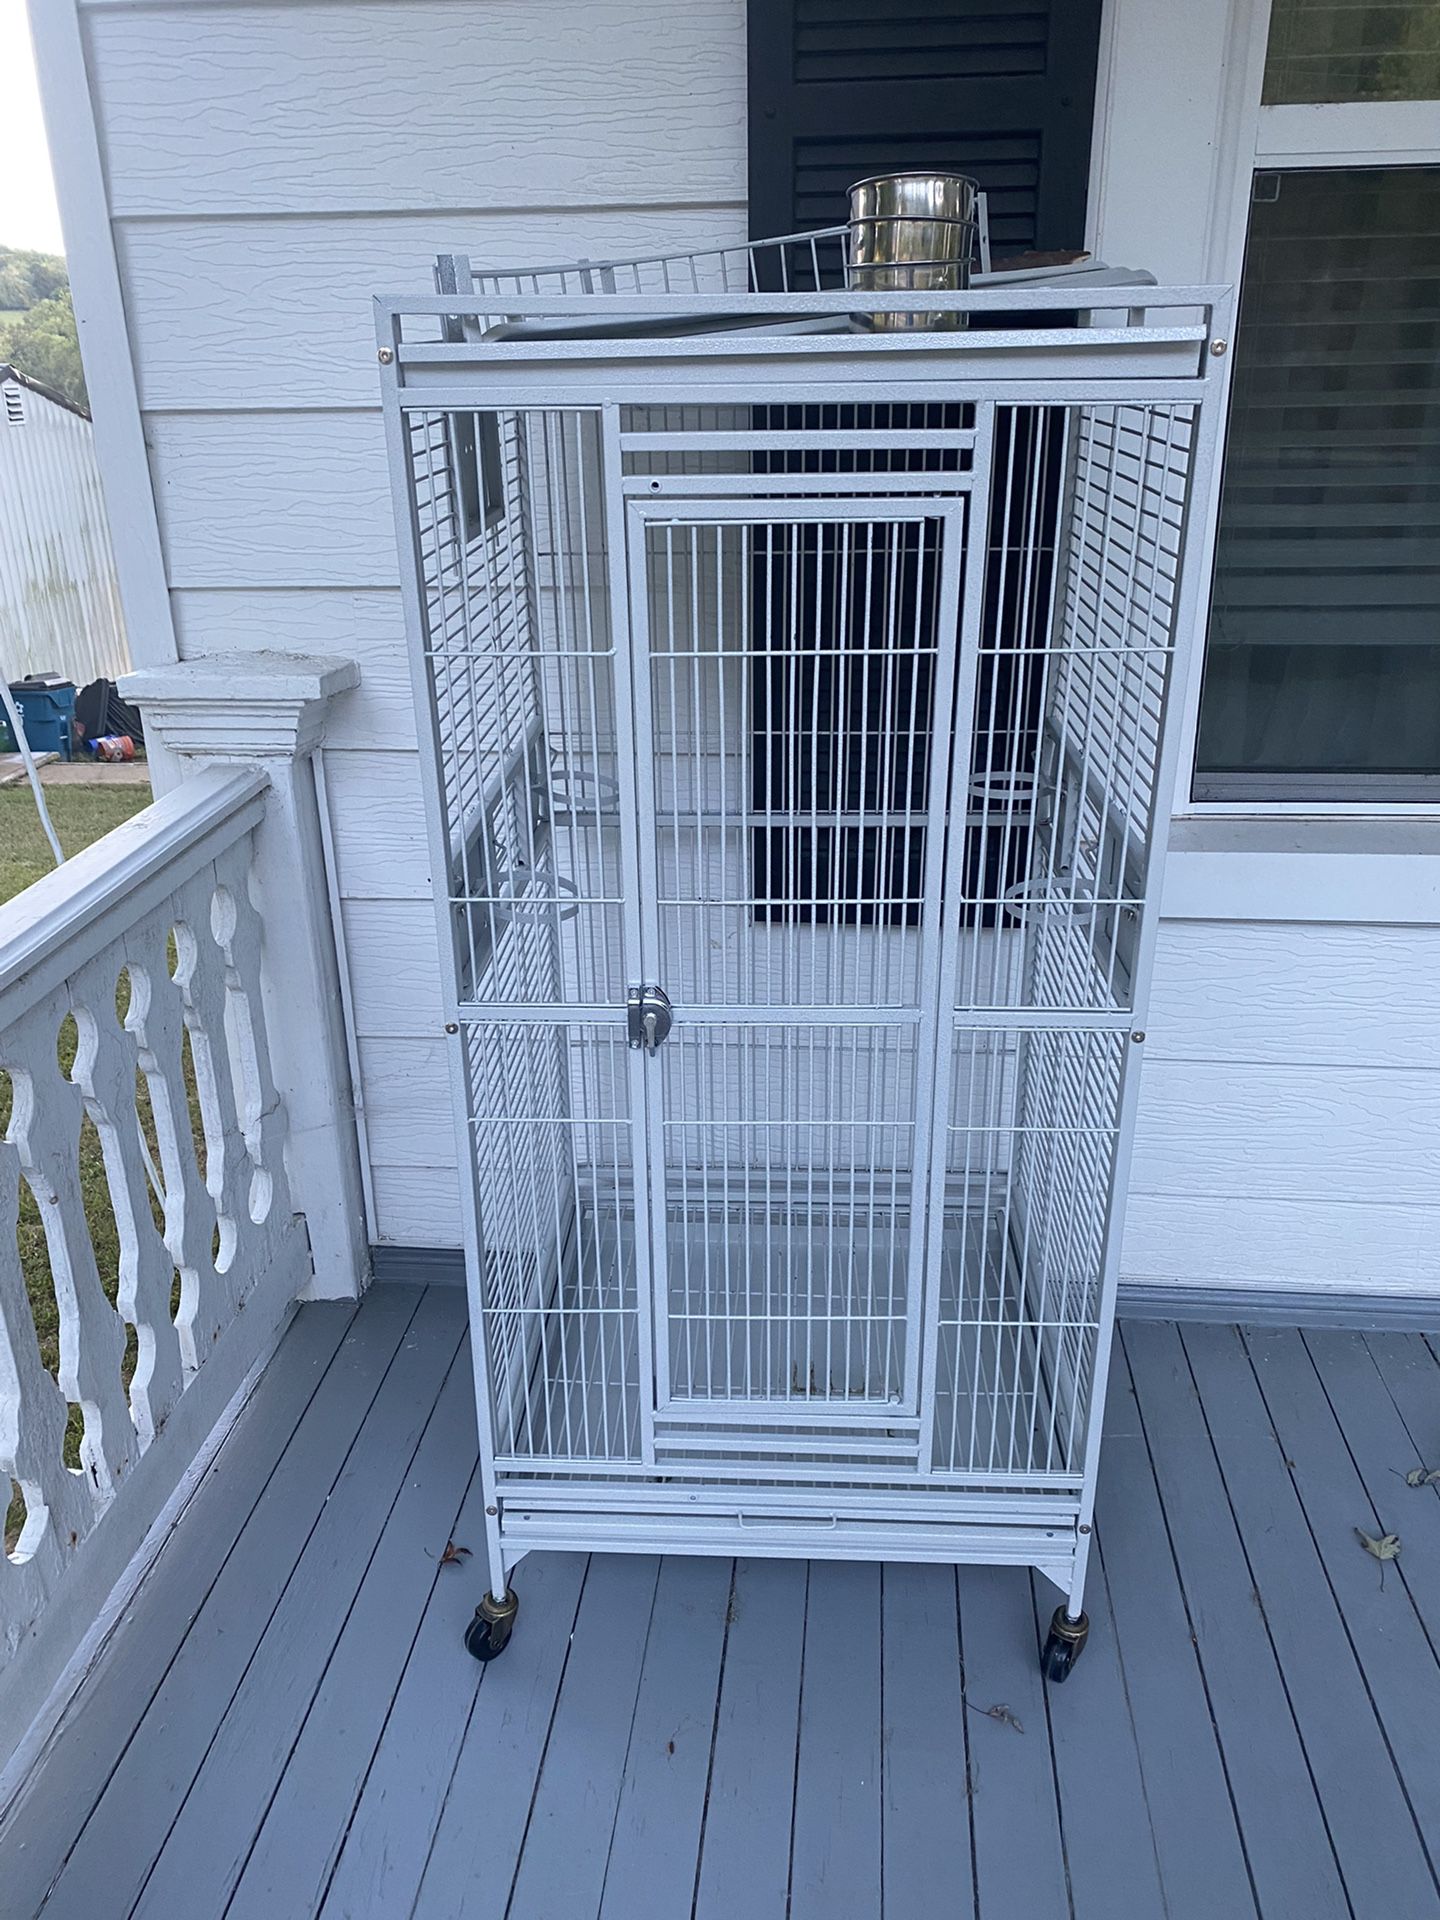 Small Parrot Cage, Like new